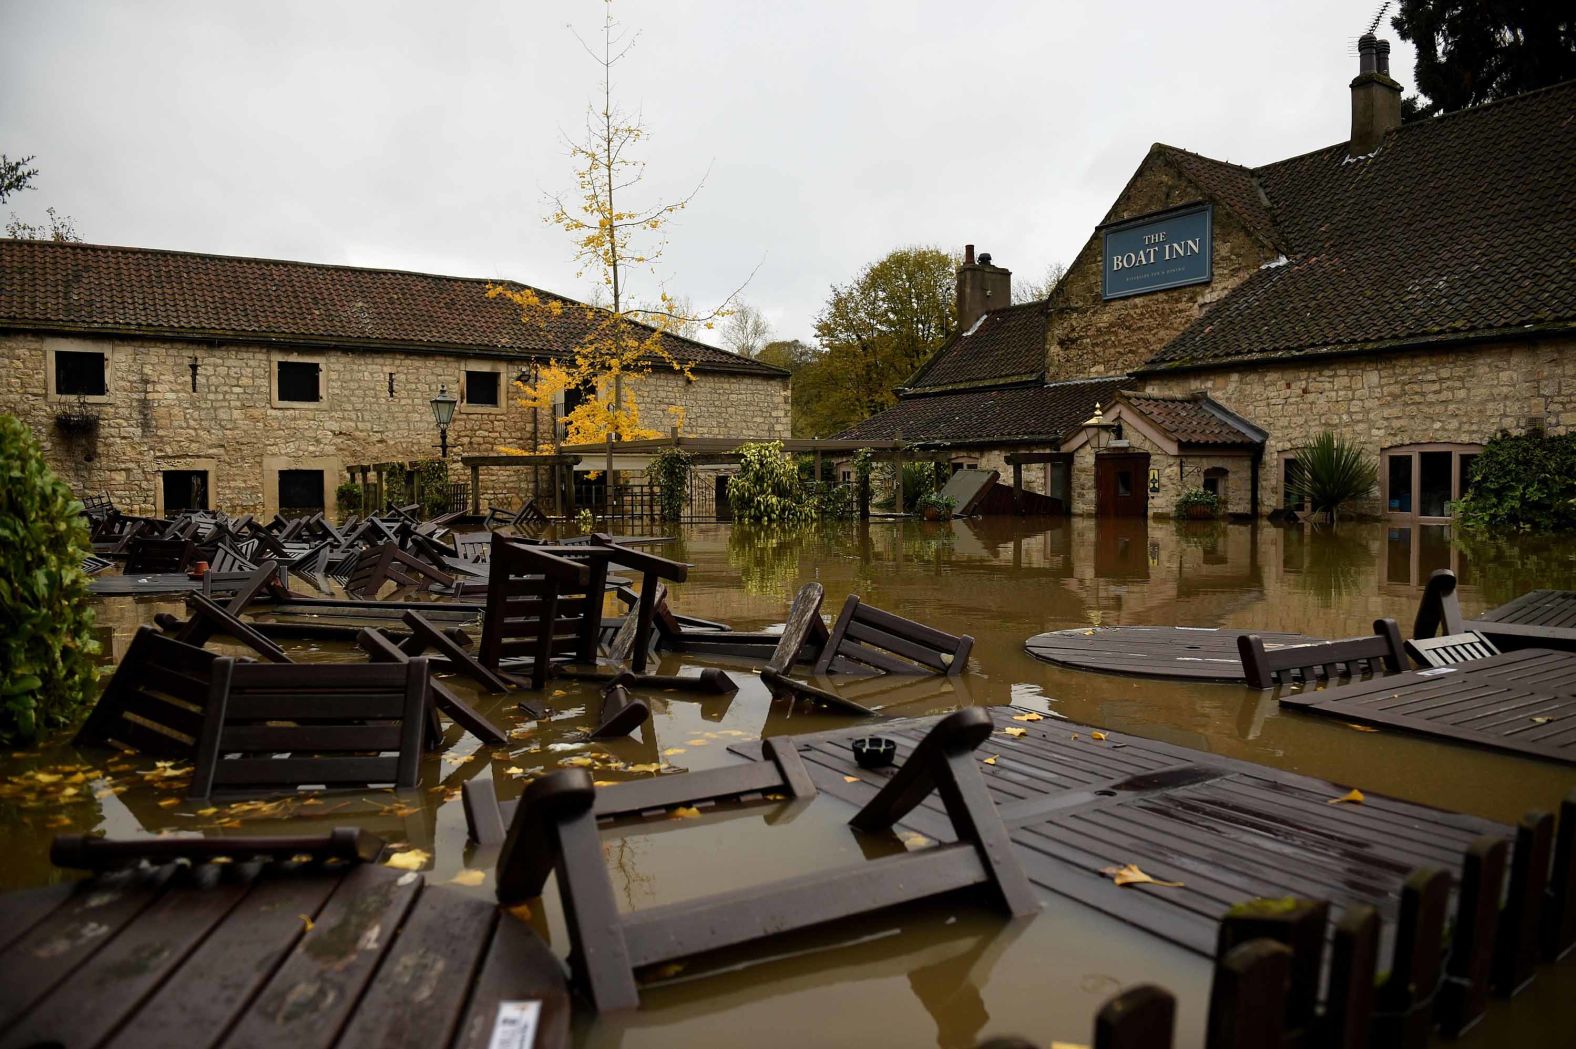 Debris floats in the courtyard of The Boat Inn at the village of Sprotbrough in northern England.